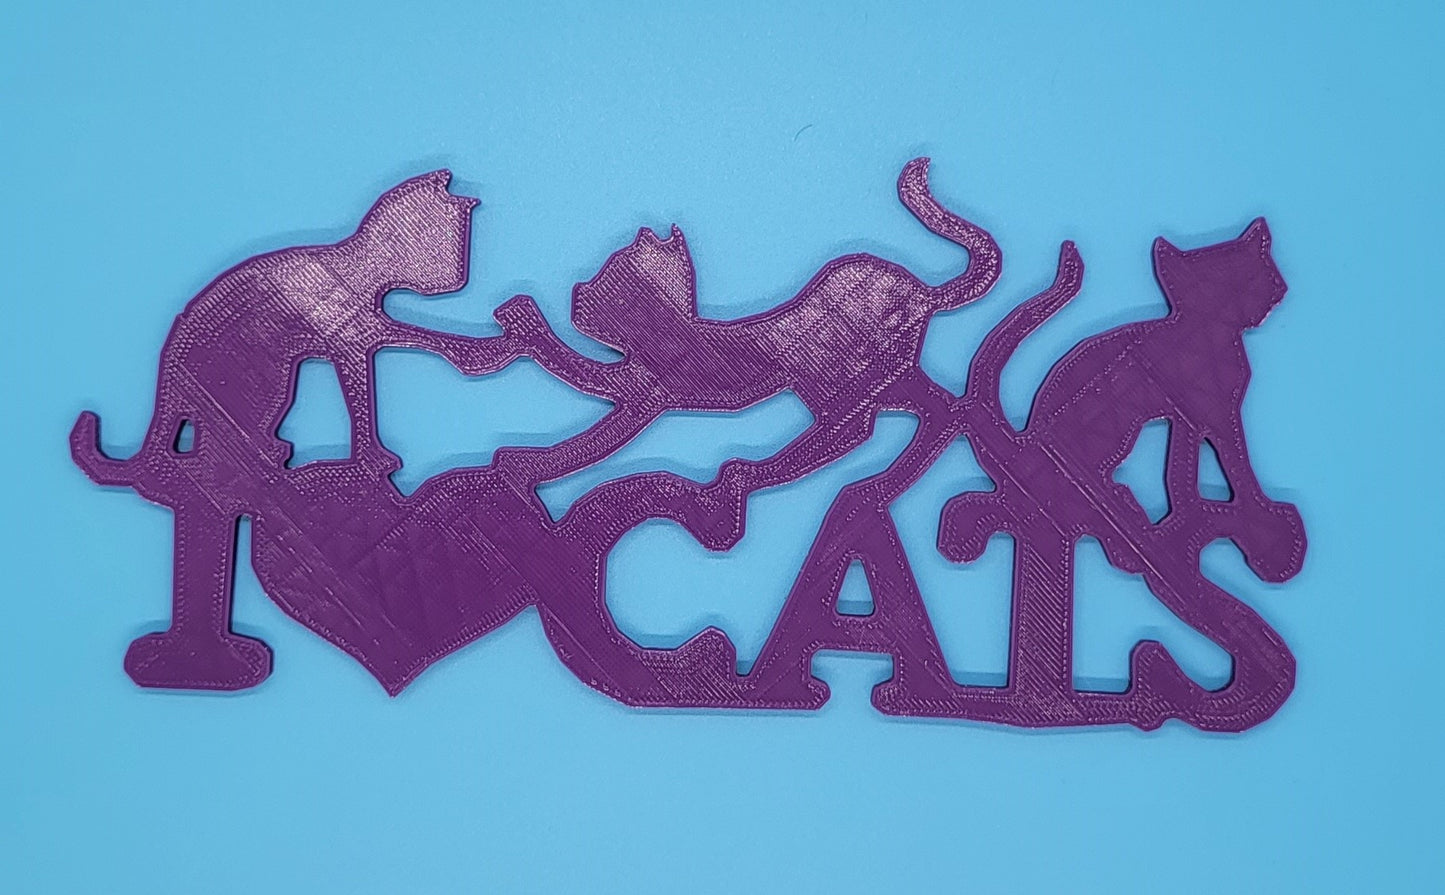 I LOVE CATS - 3D printed sign